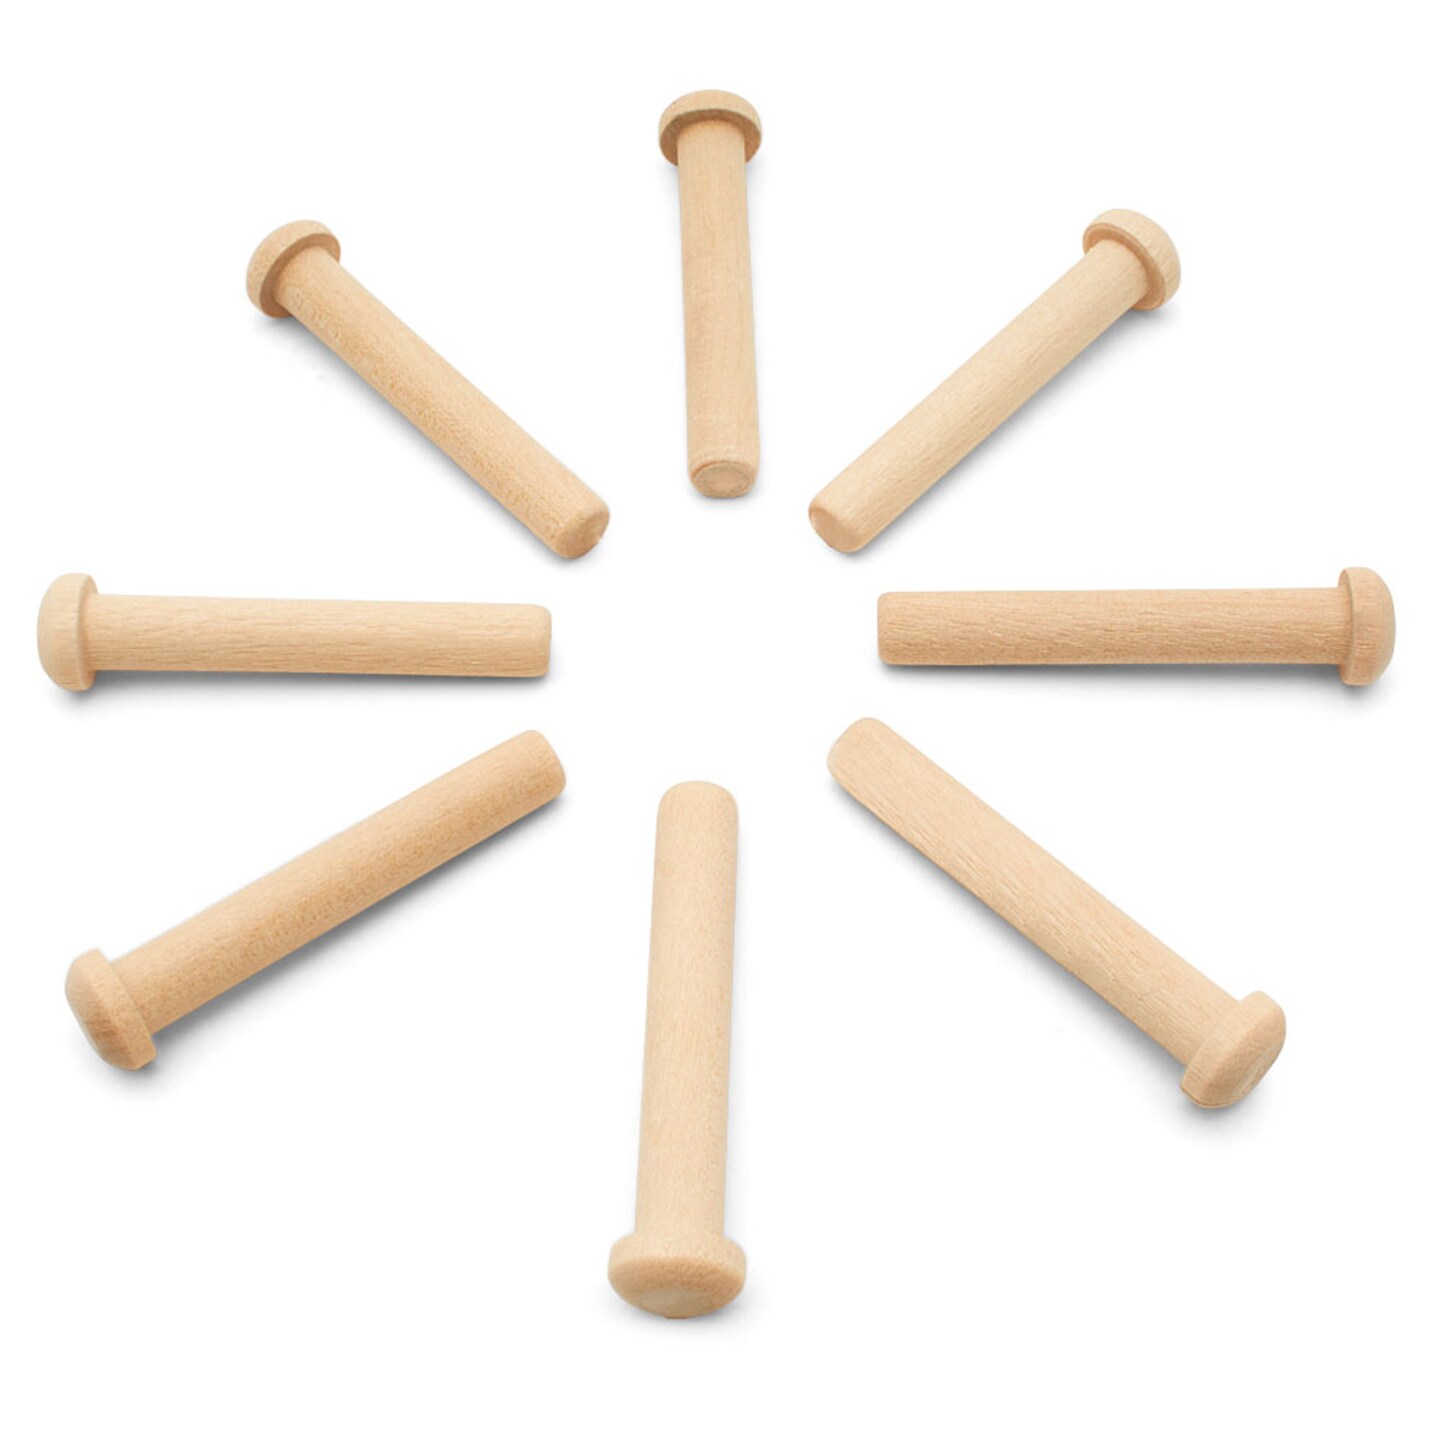 Wood Axle Pegs Multiple Sizes Available, Mini Wood Train Craft Parts for Wood Wheels | Woodpeckers